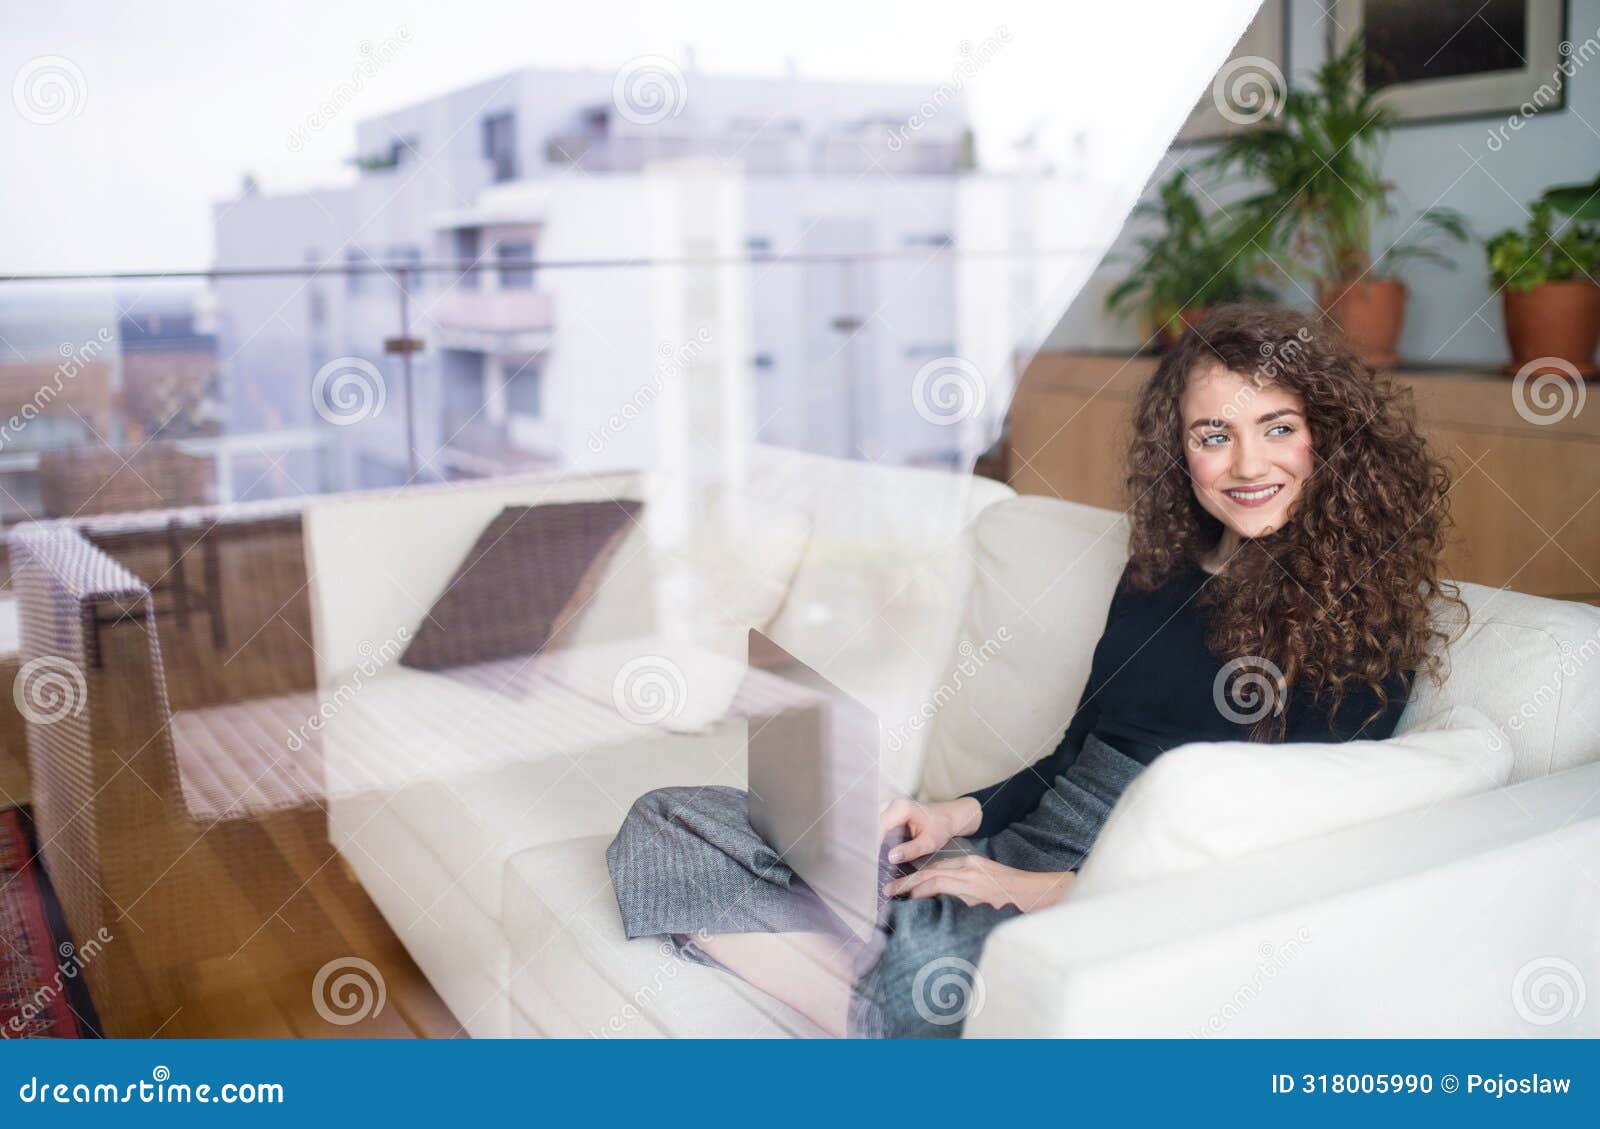 beautiful woman working on laptop at home, homeoffice for young worker. student studying at home, preparing for final